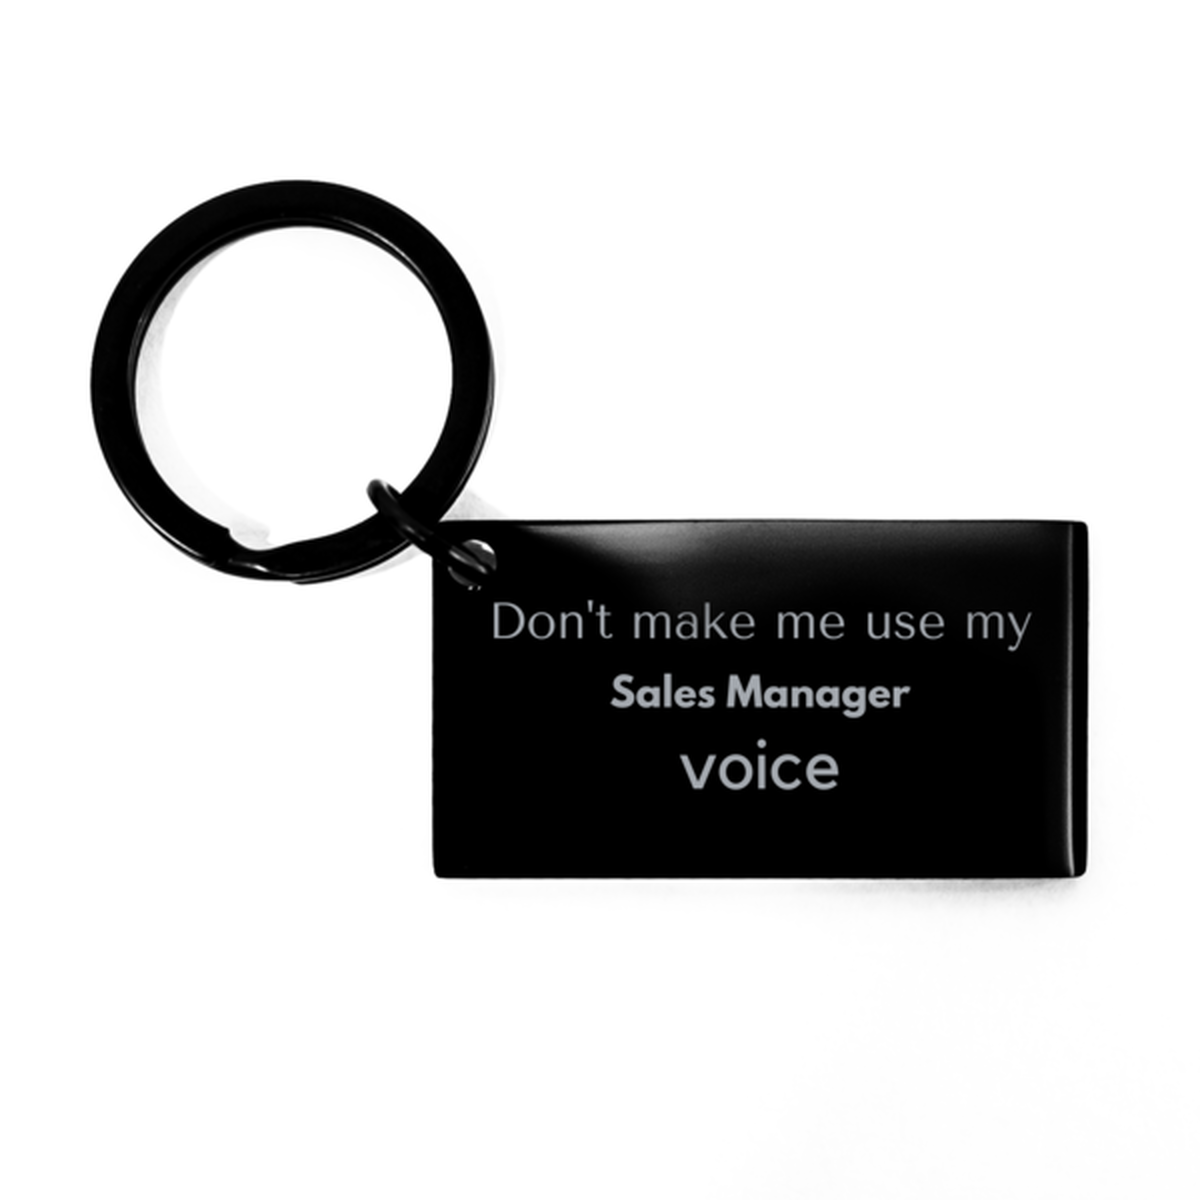 Don't make me use my Sales Manager voice, Sarcasm Sales Manager Gifts, Christmas Sales Manager Keychain Birthday Unique Gifts For Sales Manager Coworkers, Men, Women, Colleague, Friends